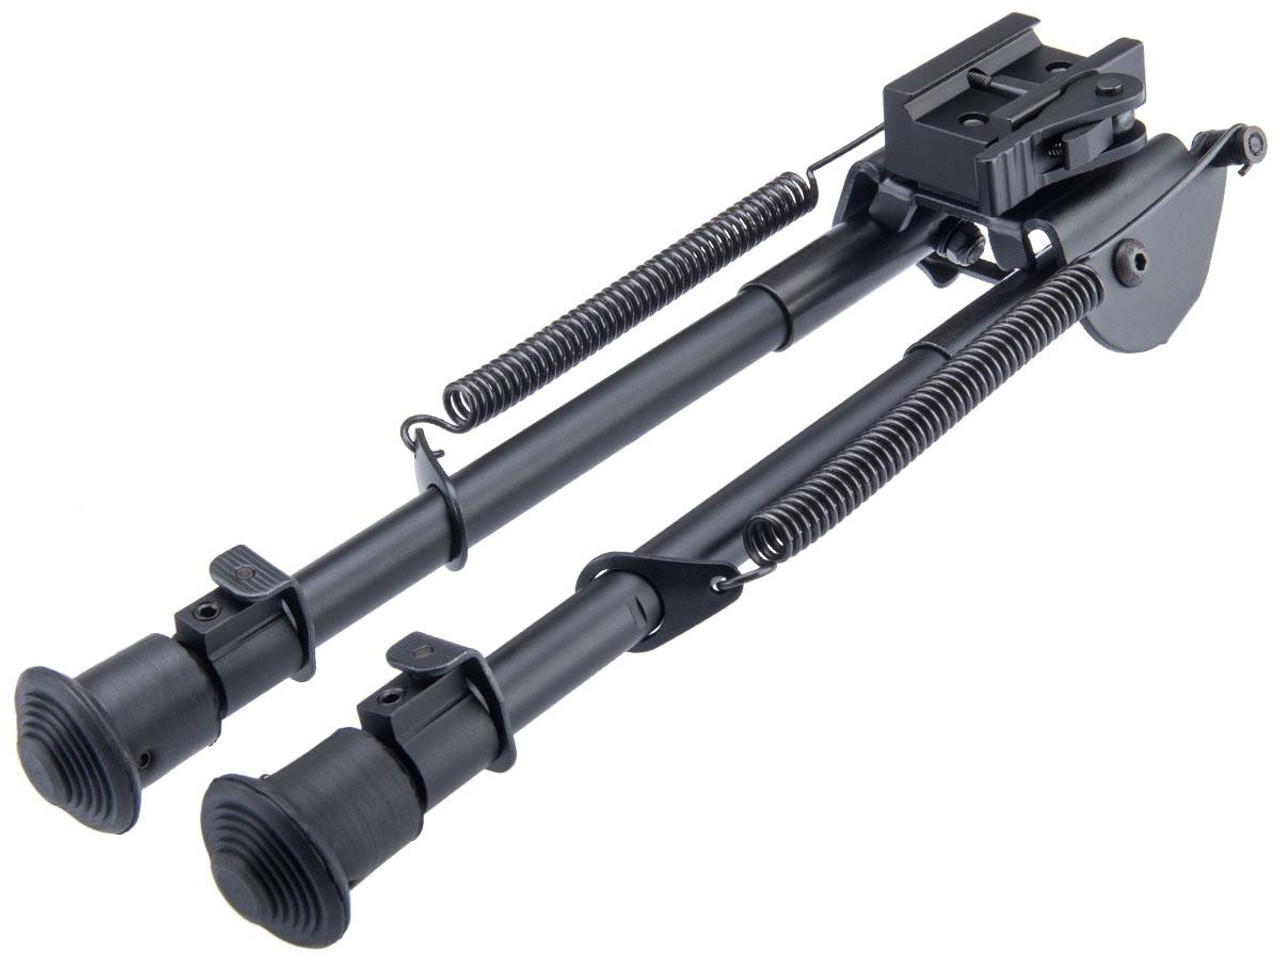 EMG Adjustable Real Steel Tactical Bipod w/ Harris and RIS Mounts